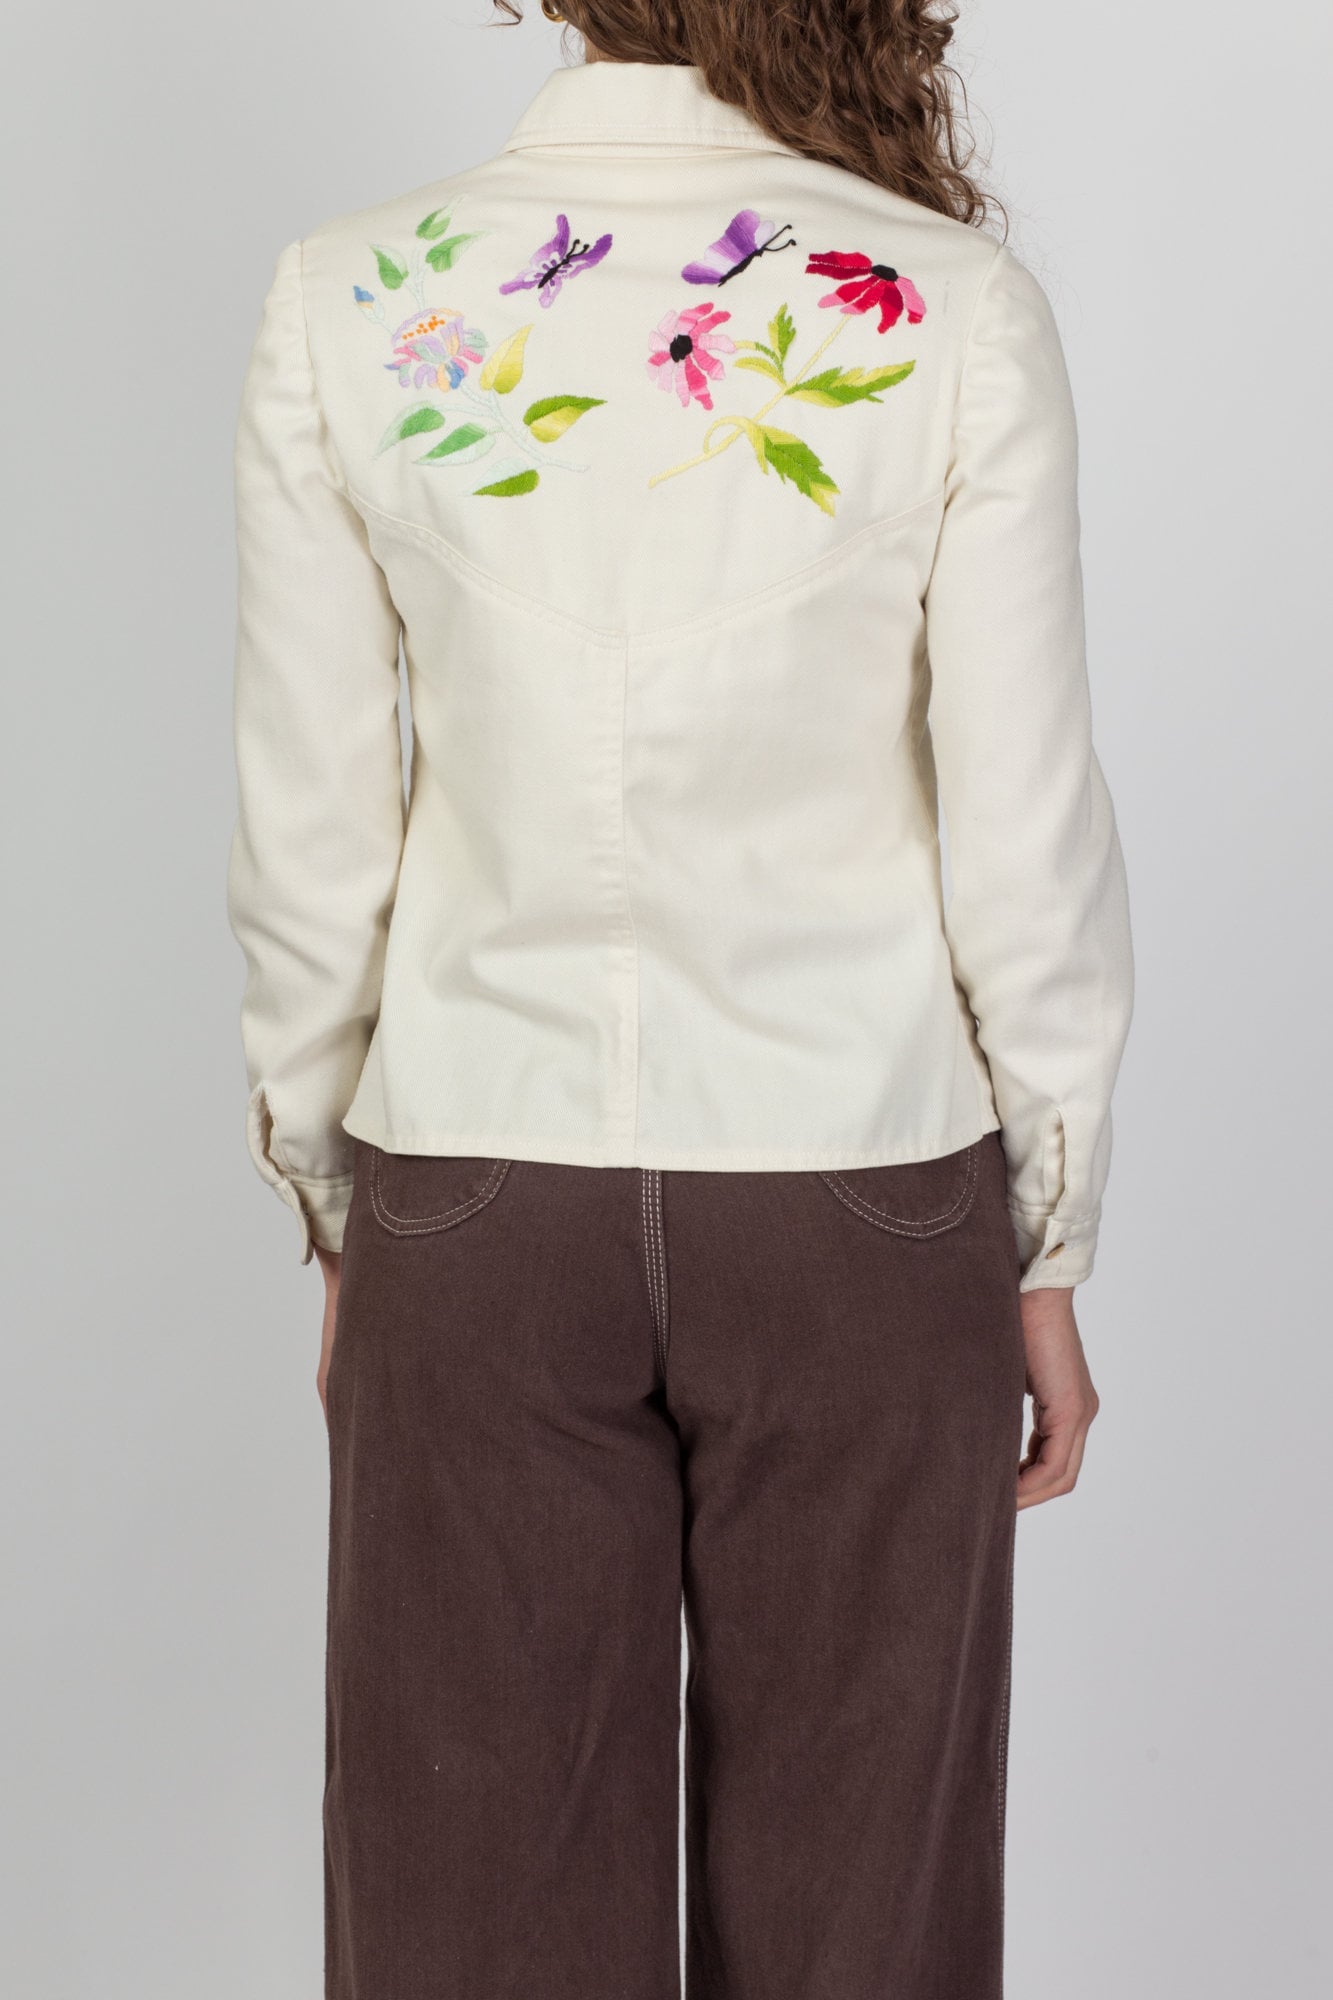 70s Embroidered Off-White Denim Look Jacket - Small 